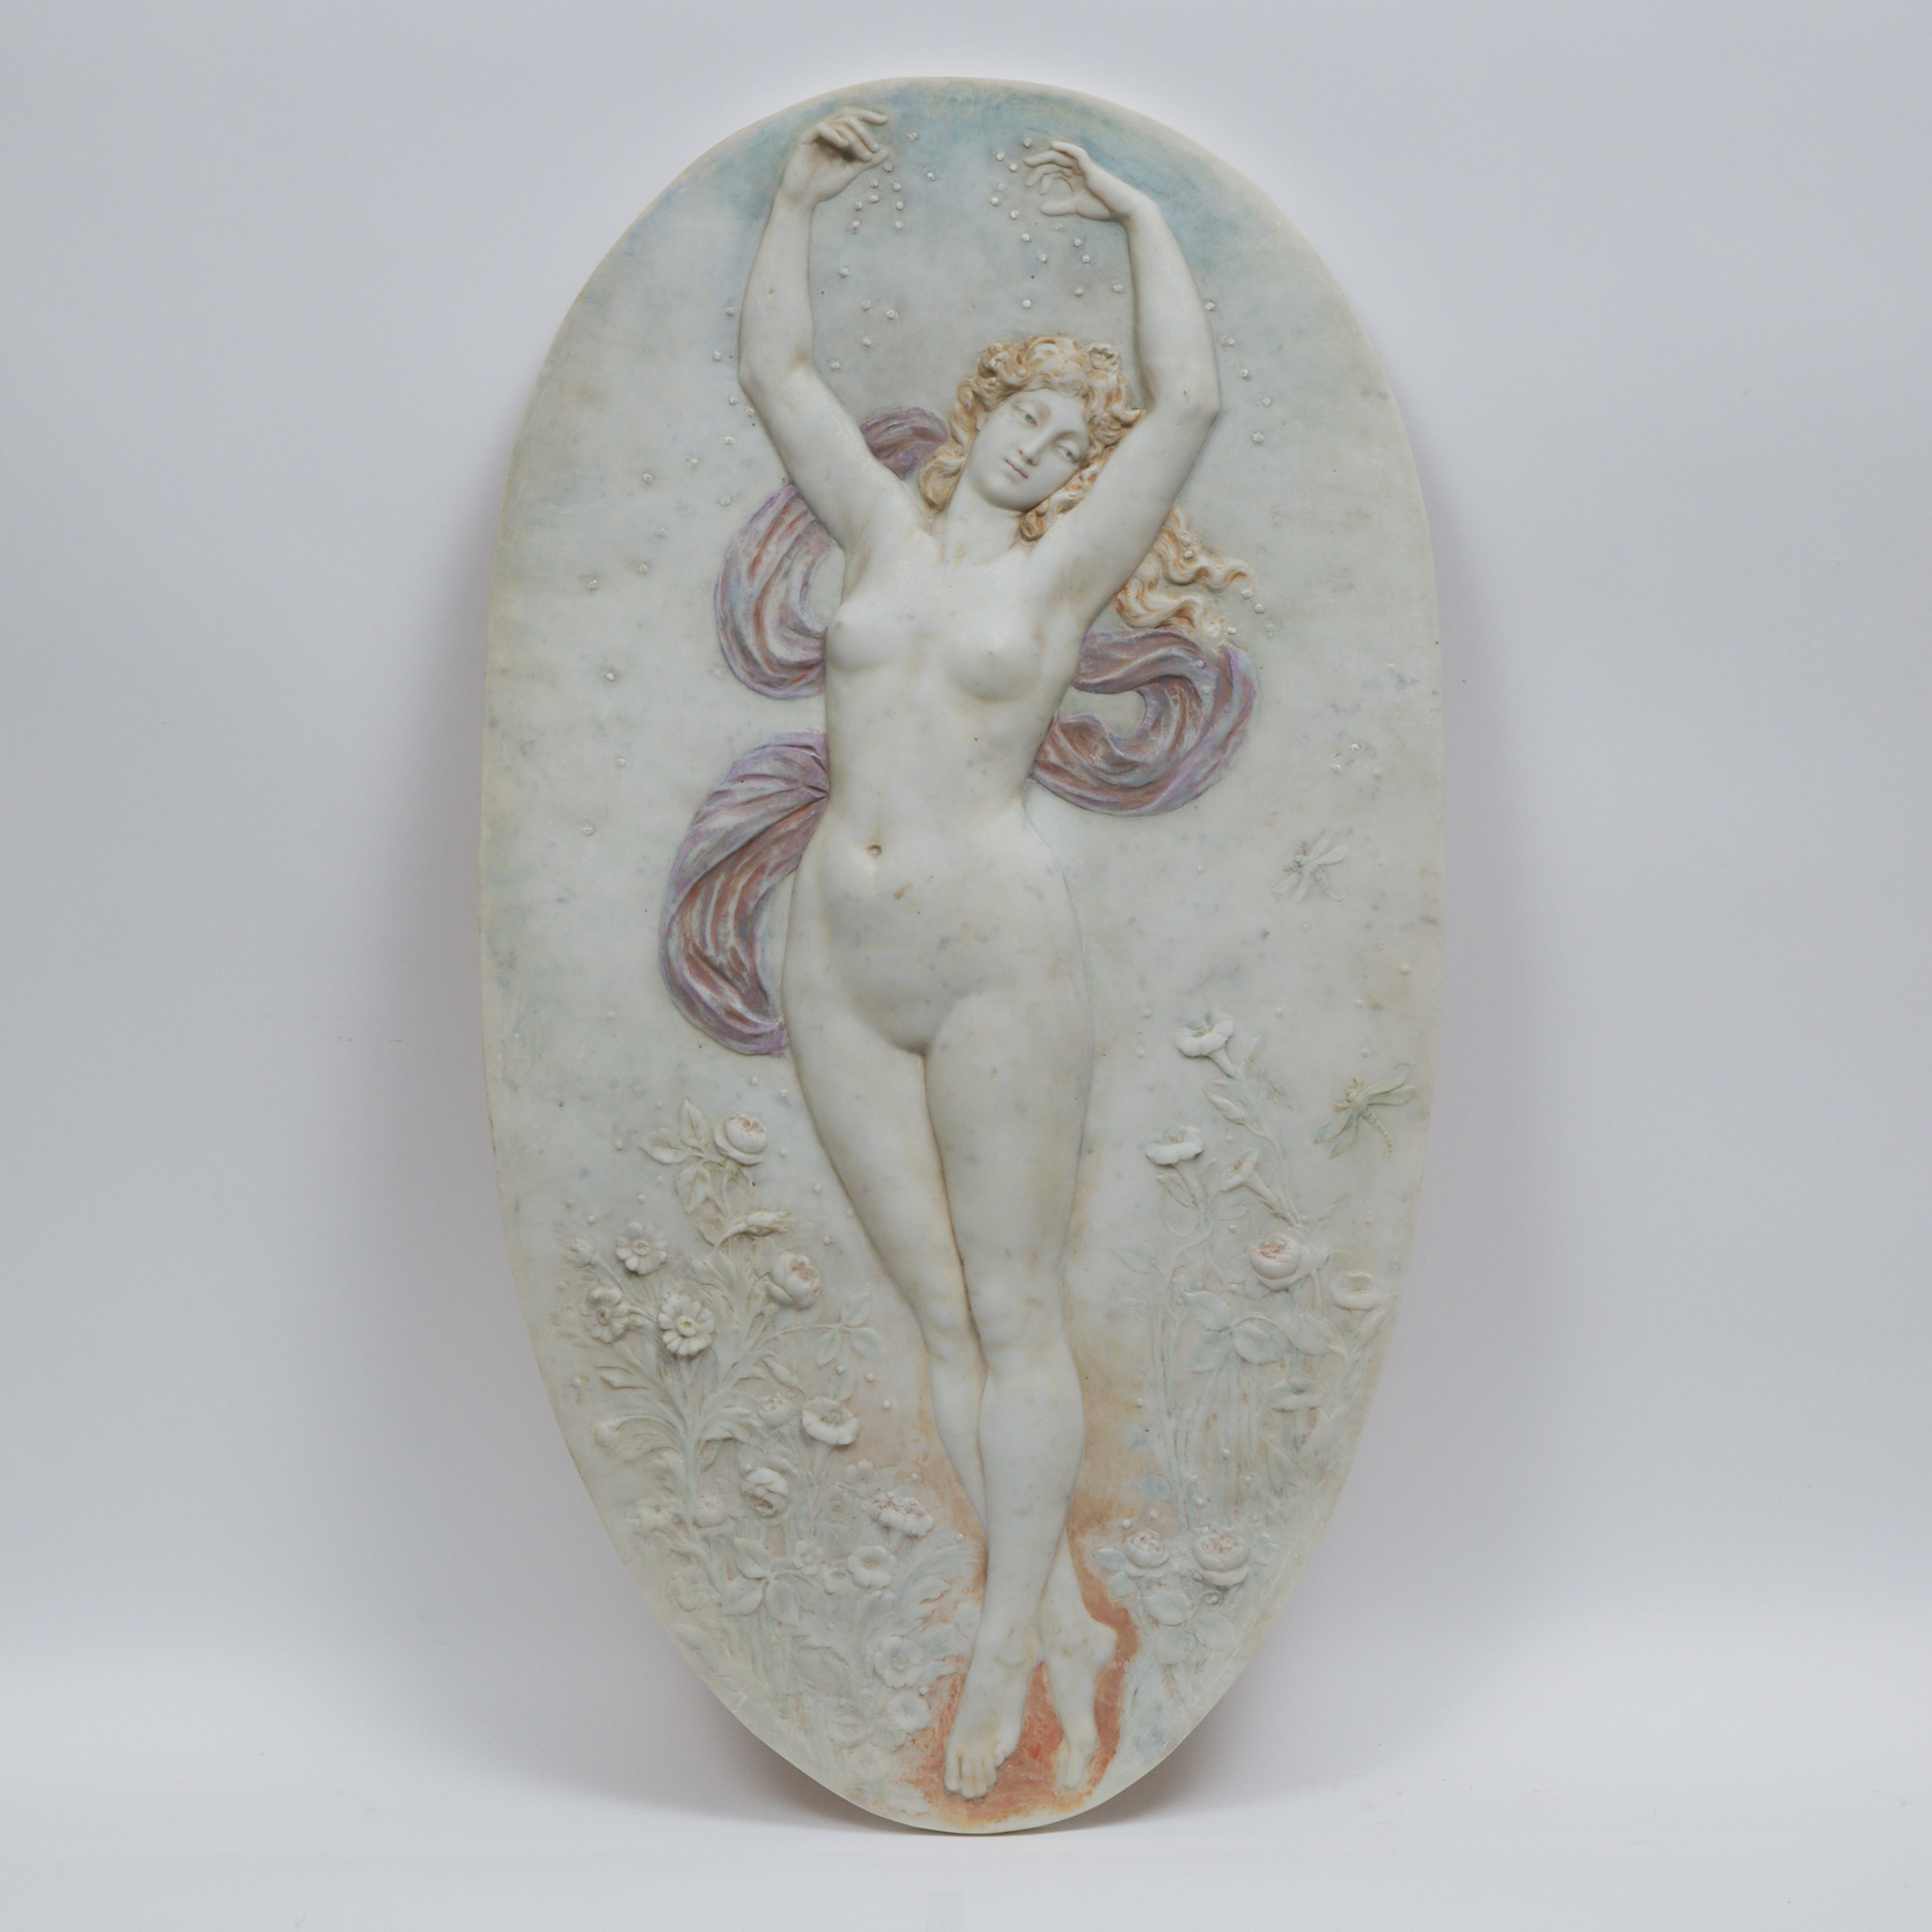 French Art Nouveau Marble Relief Oval Architectural Panel, late 19th century